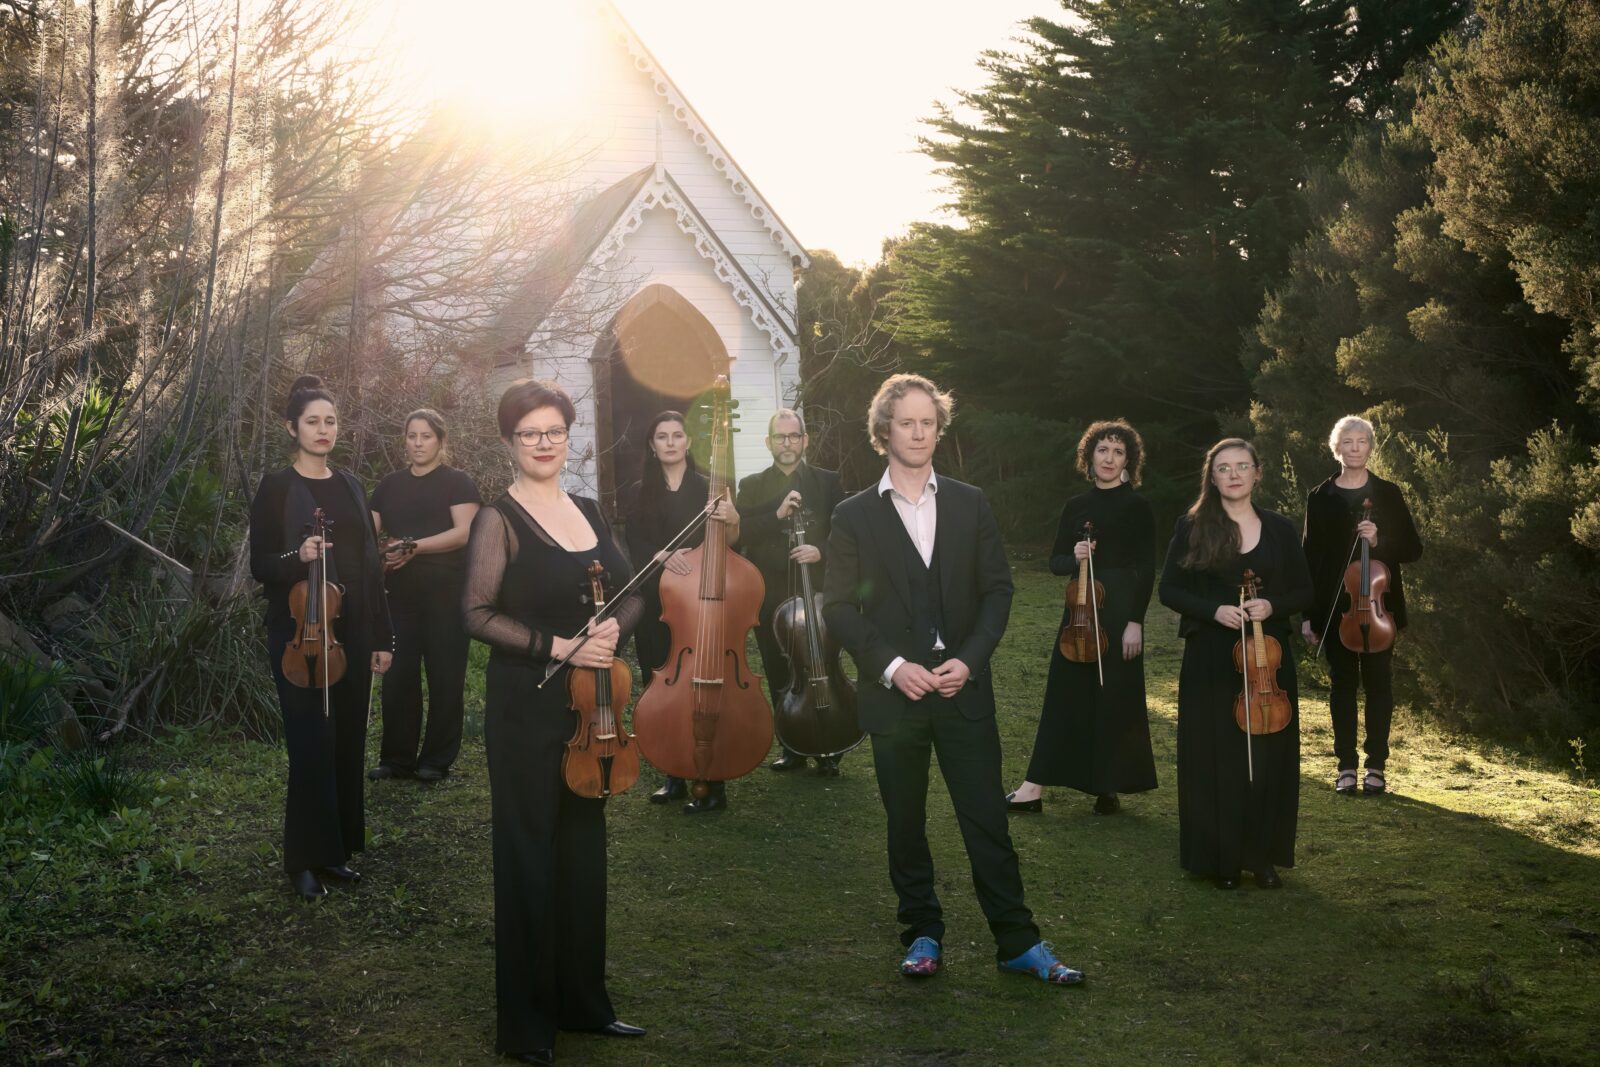 A group of musicians stand in front of an old wooden church